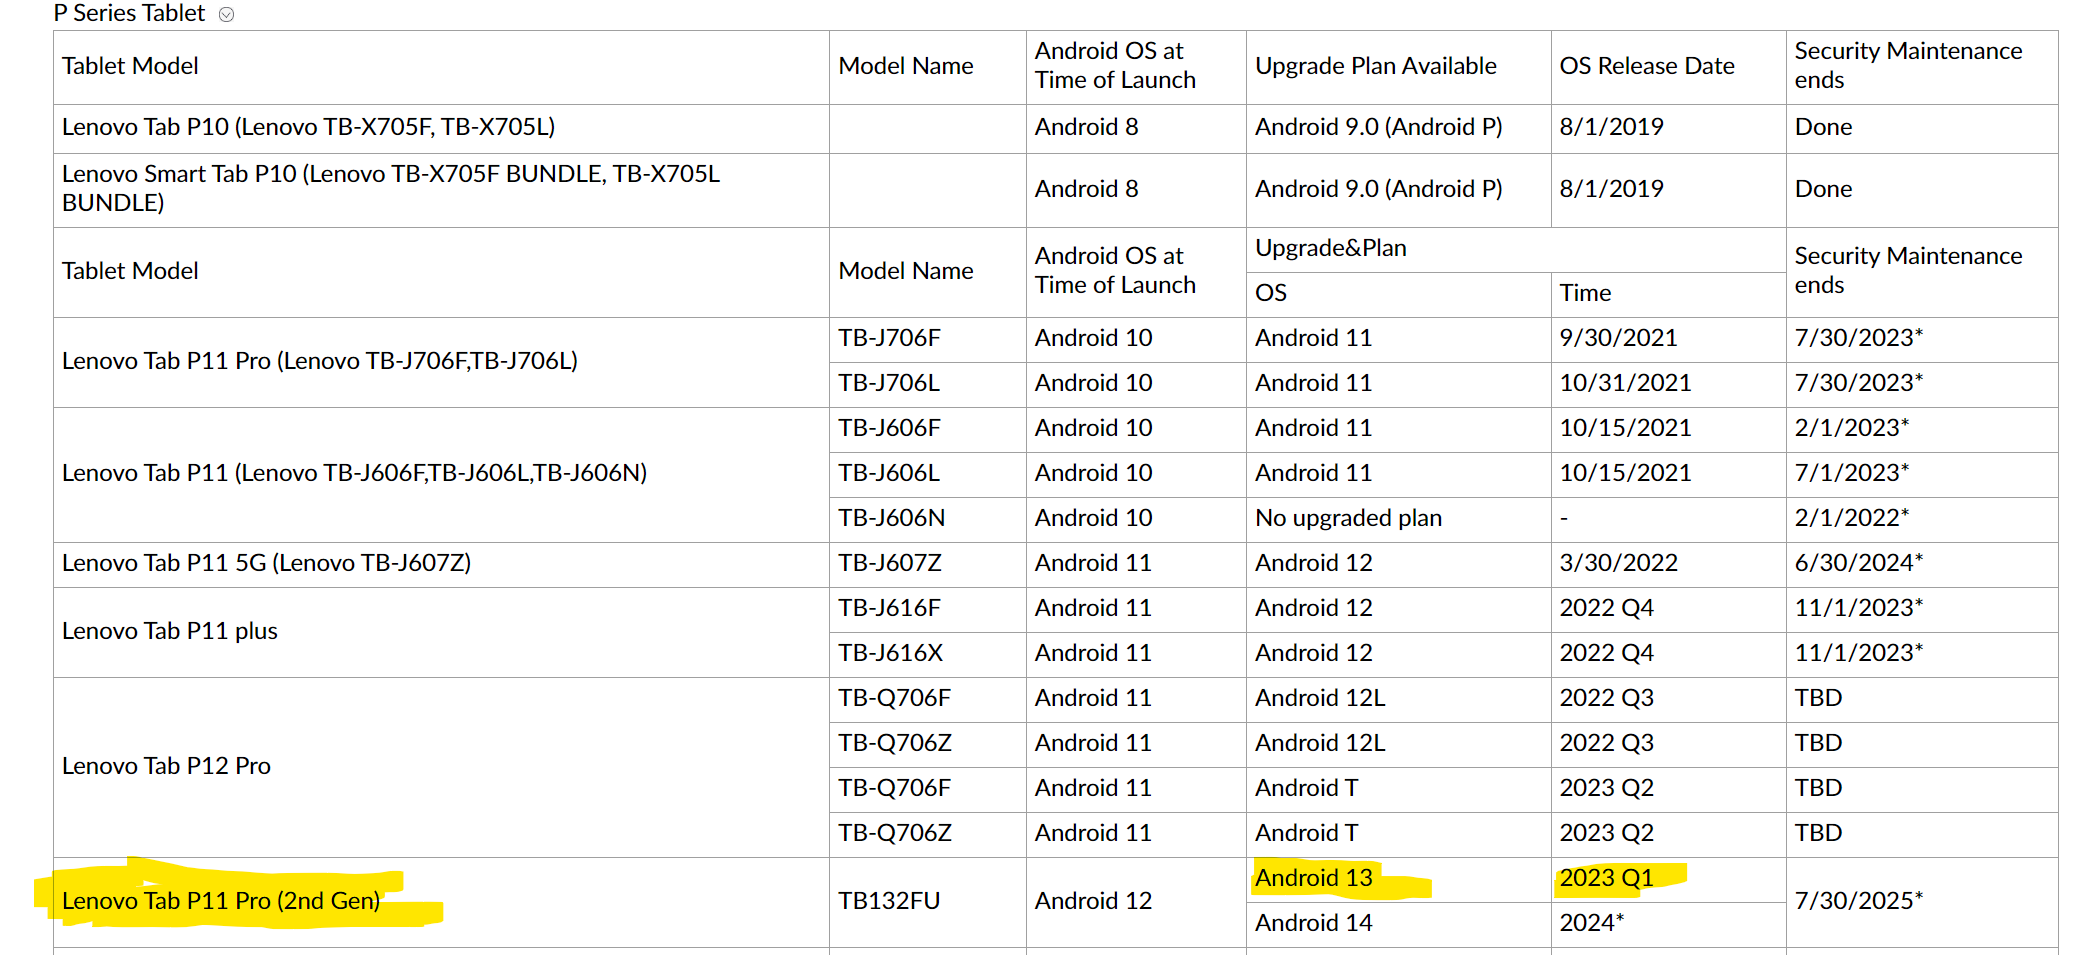 P11-Pro-Gen-2-running-out-of-Q1-time-for-Android-13-update - English  Community - LENOVO COMMUNITY